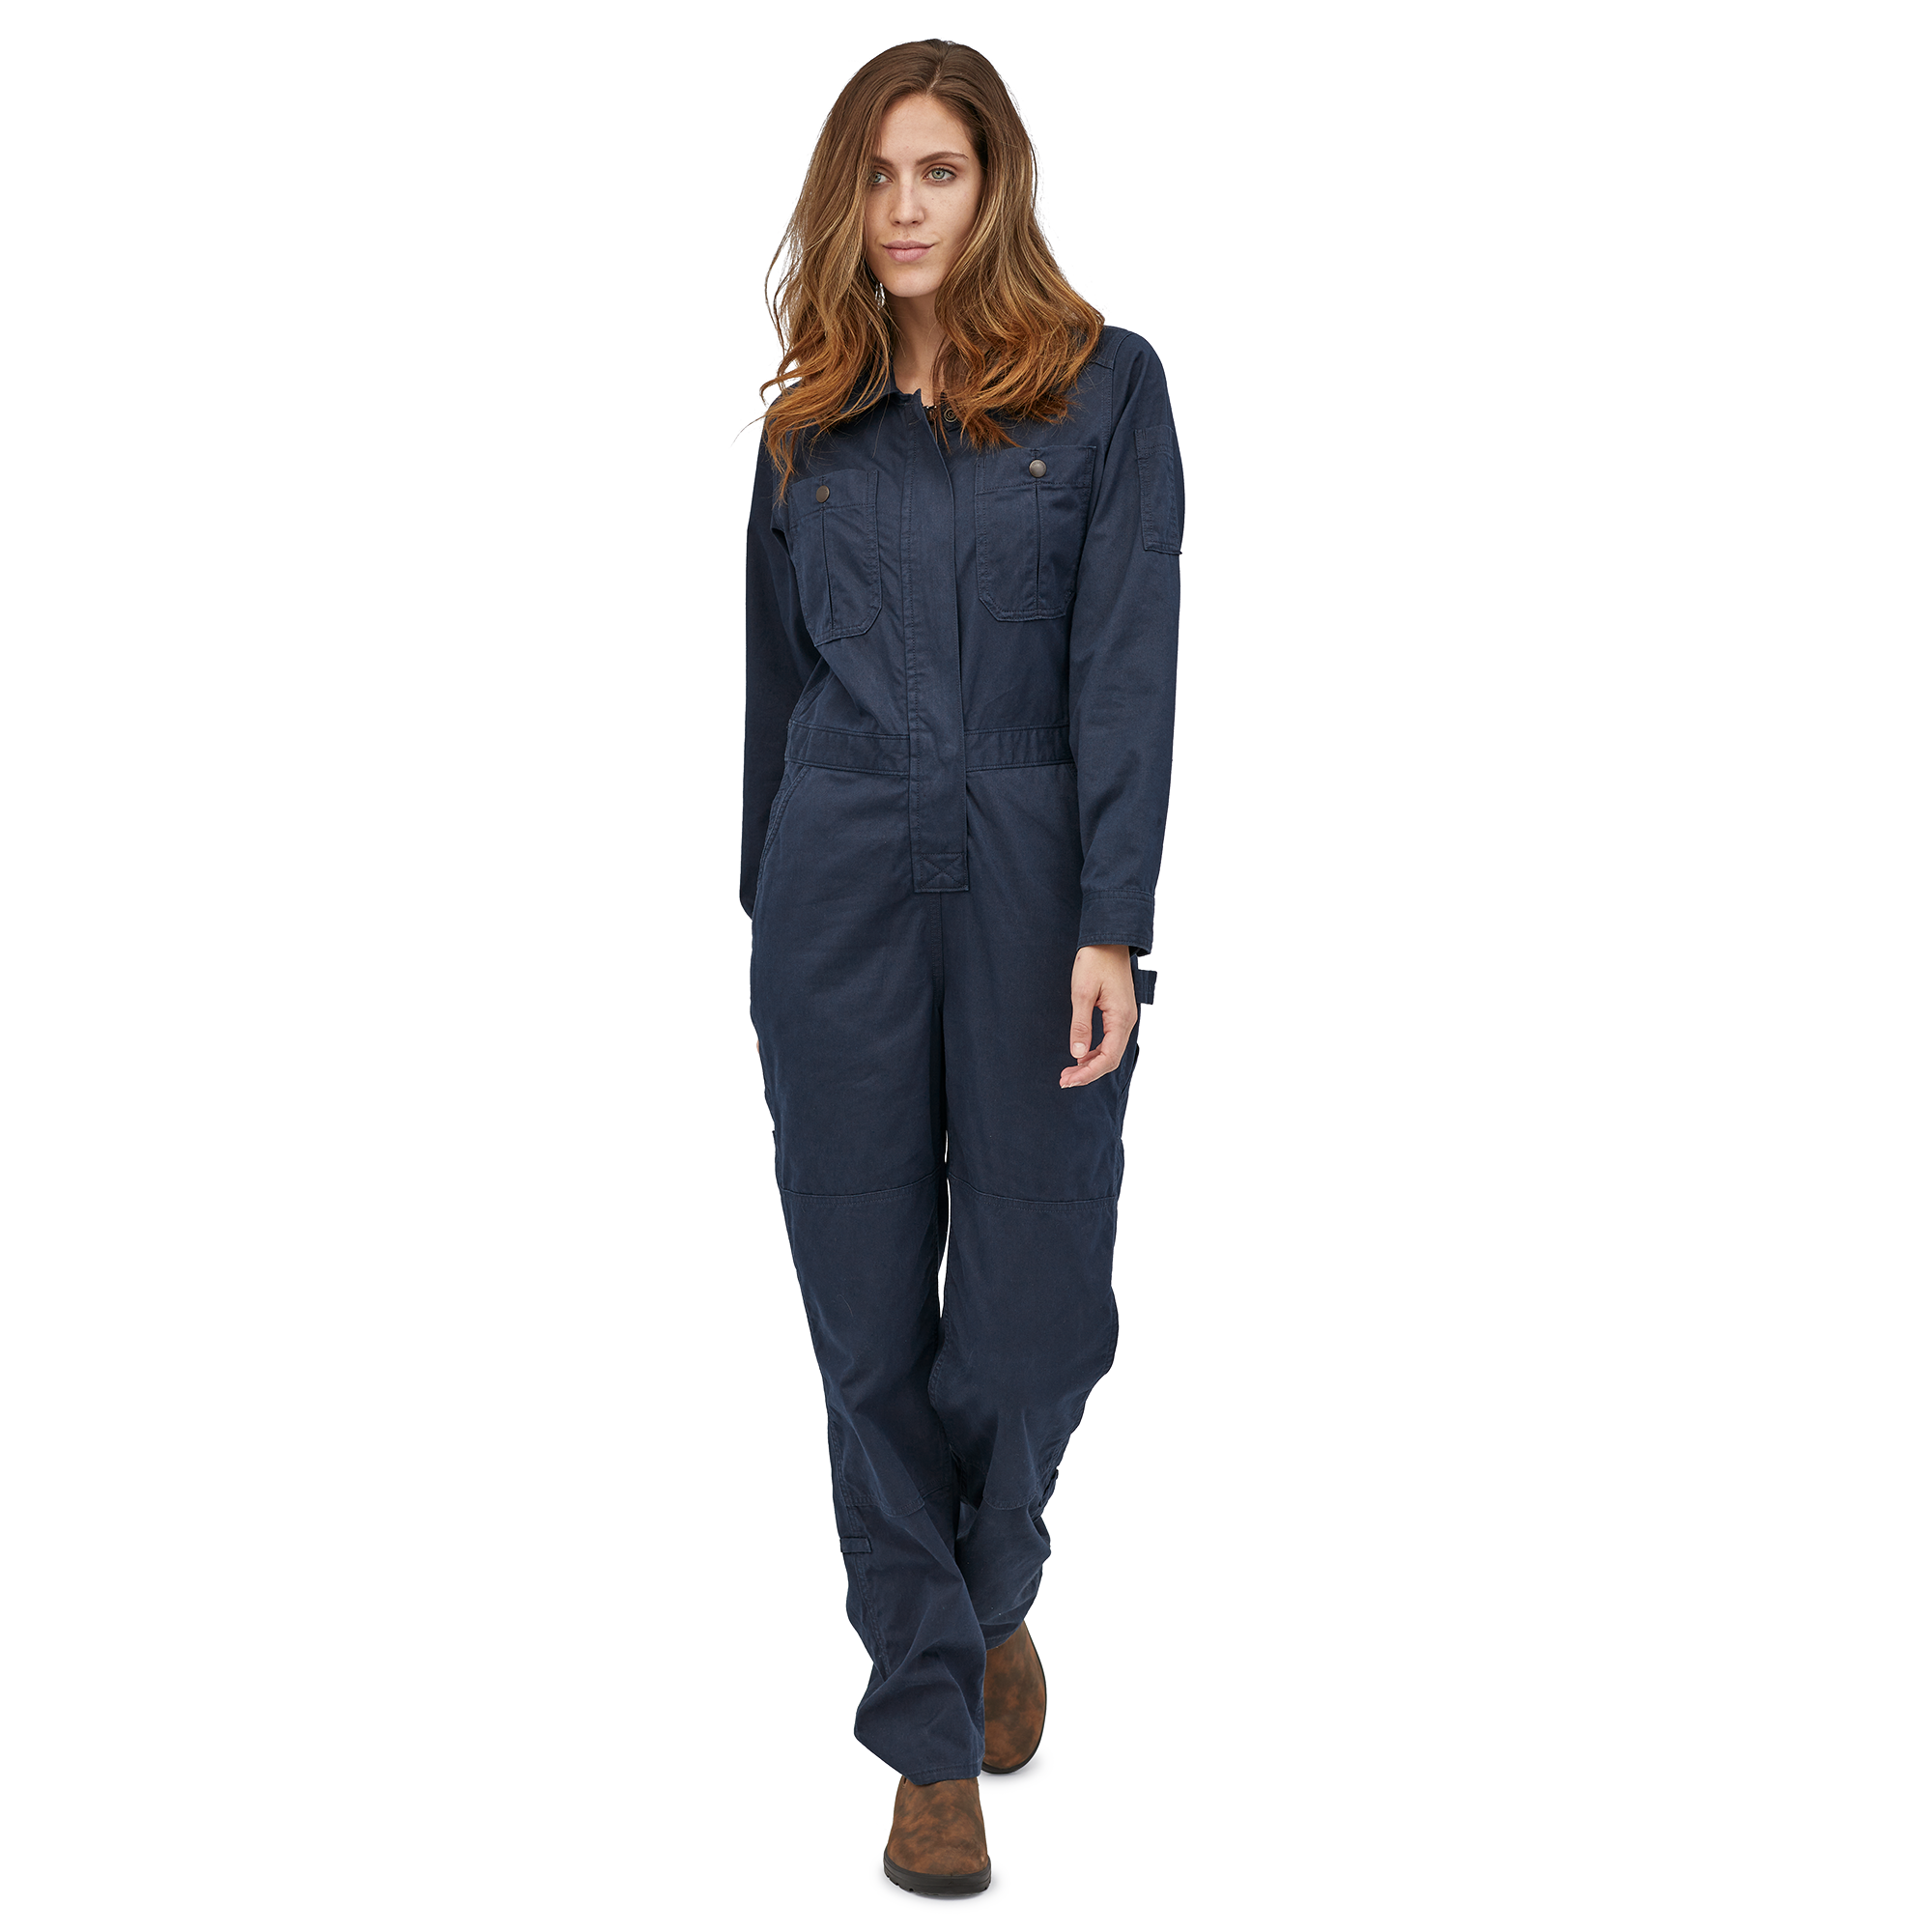 Patagonia Women's Shop Coveralls